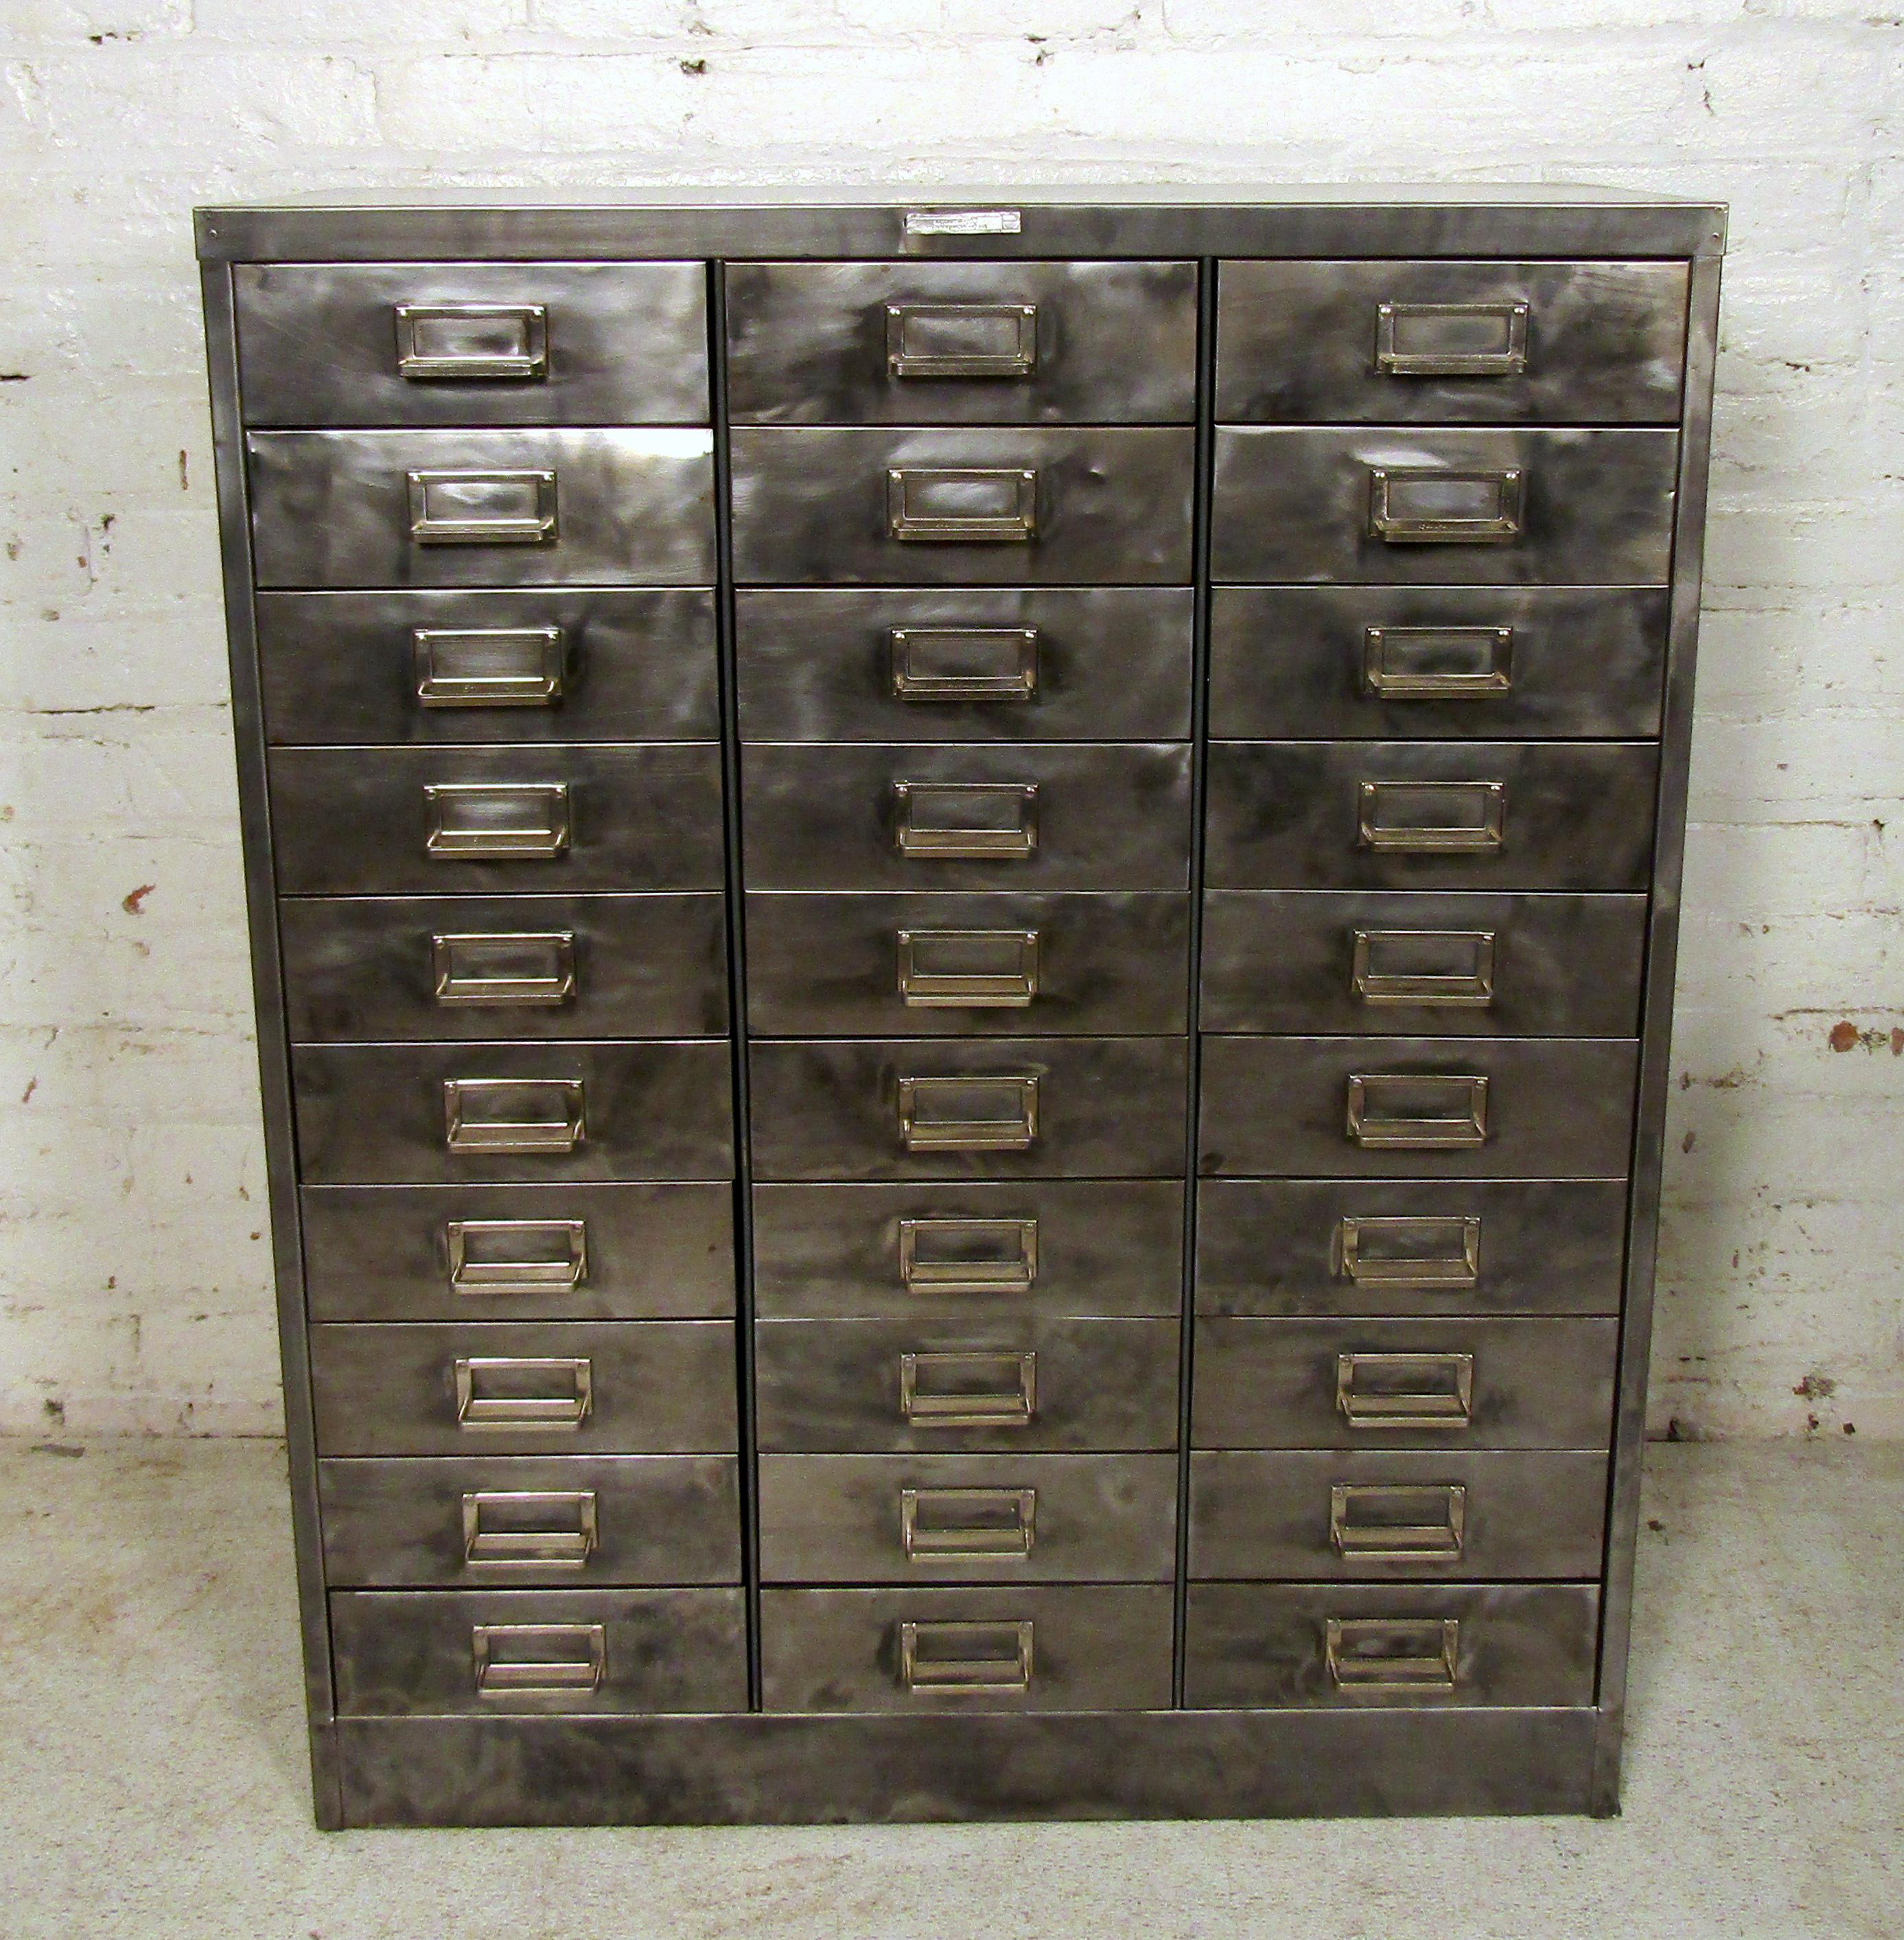 Beautiful industrial metal file cabinet in a bare metal finish.
Please confirm item location (NY or NJ).
     